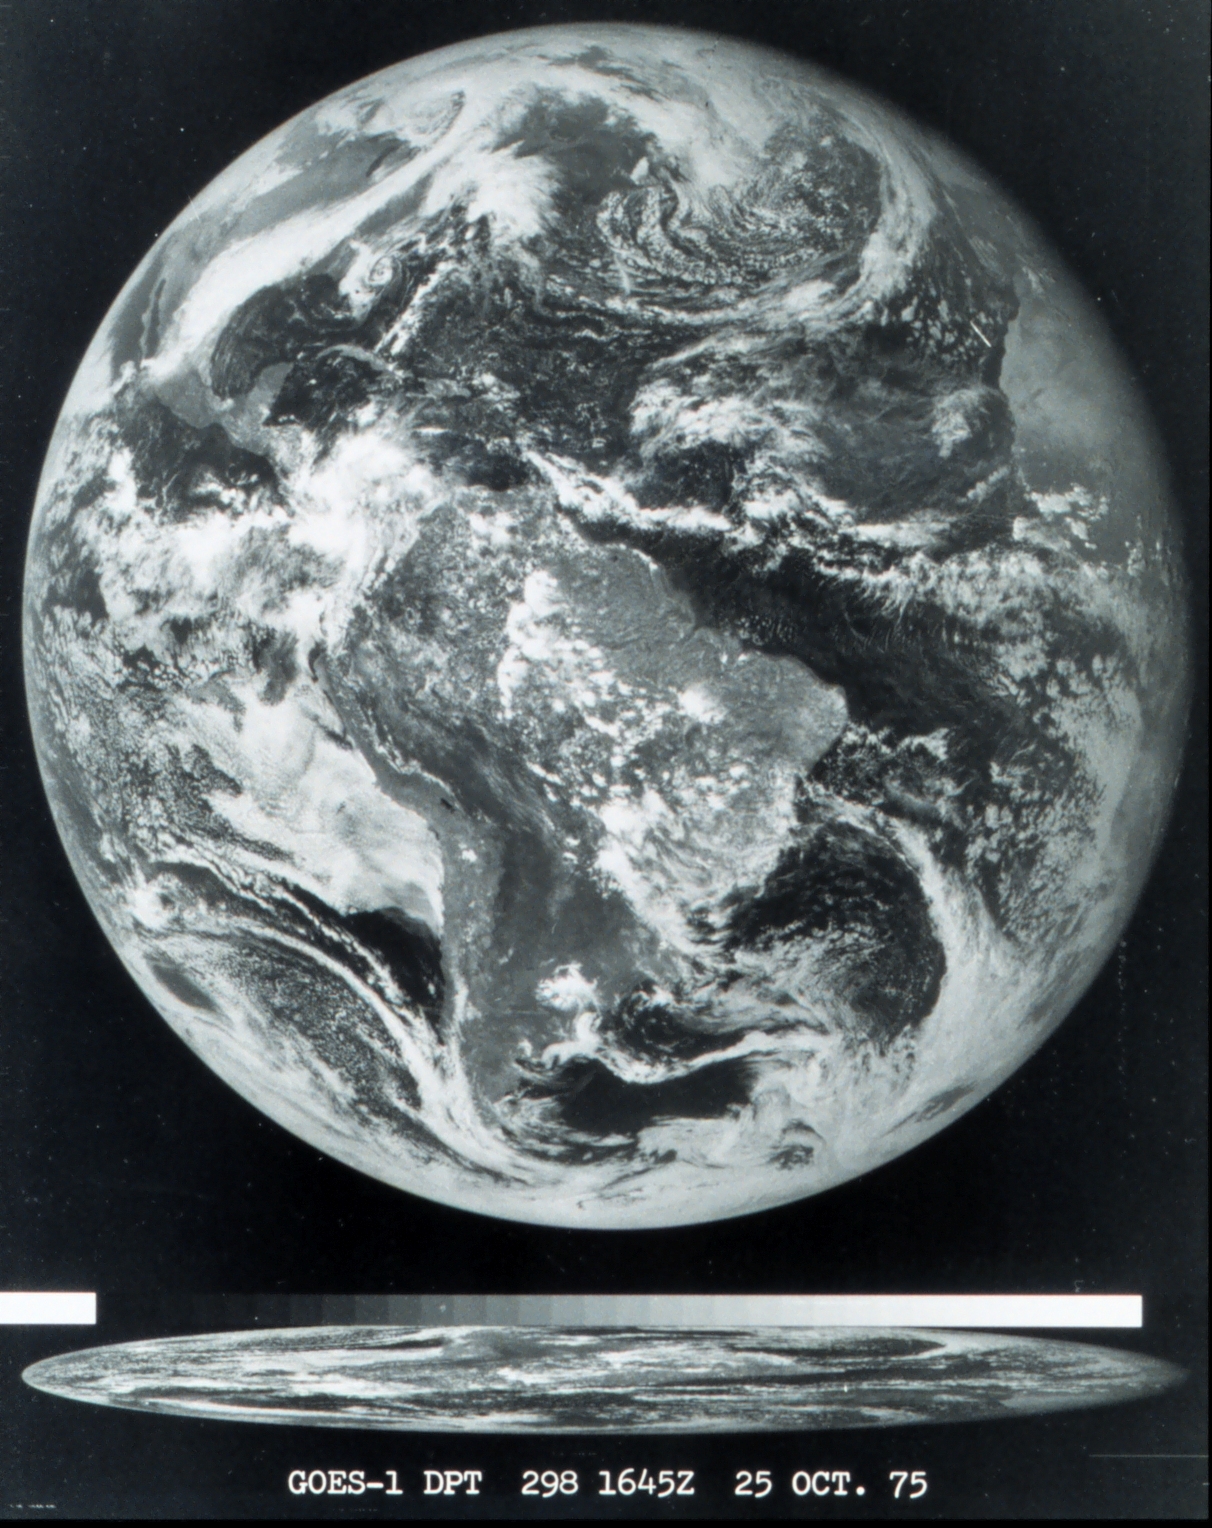 Image credit: National Oceanic and Atmospheric Administration, of the first image ever obtained from a GOES satellite. This image was taken from over 22,000 miles (35,000 km) above the Earth's surface on October 25, 1975.